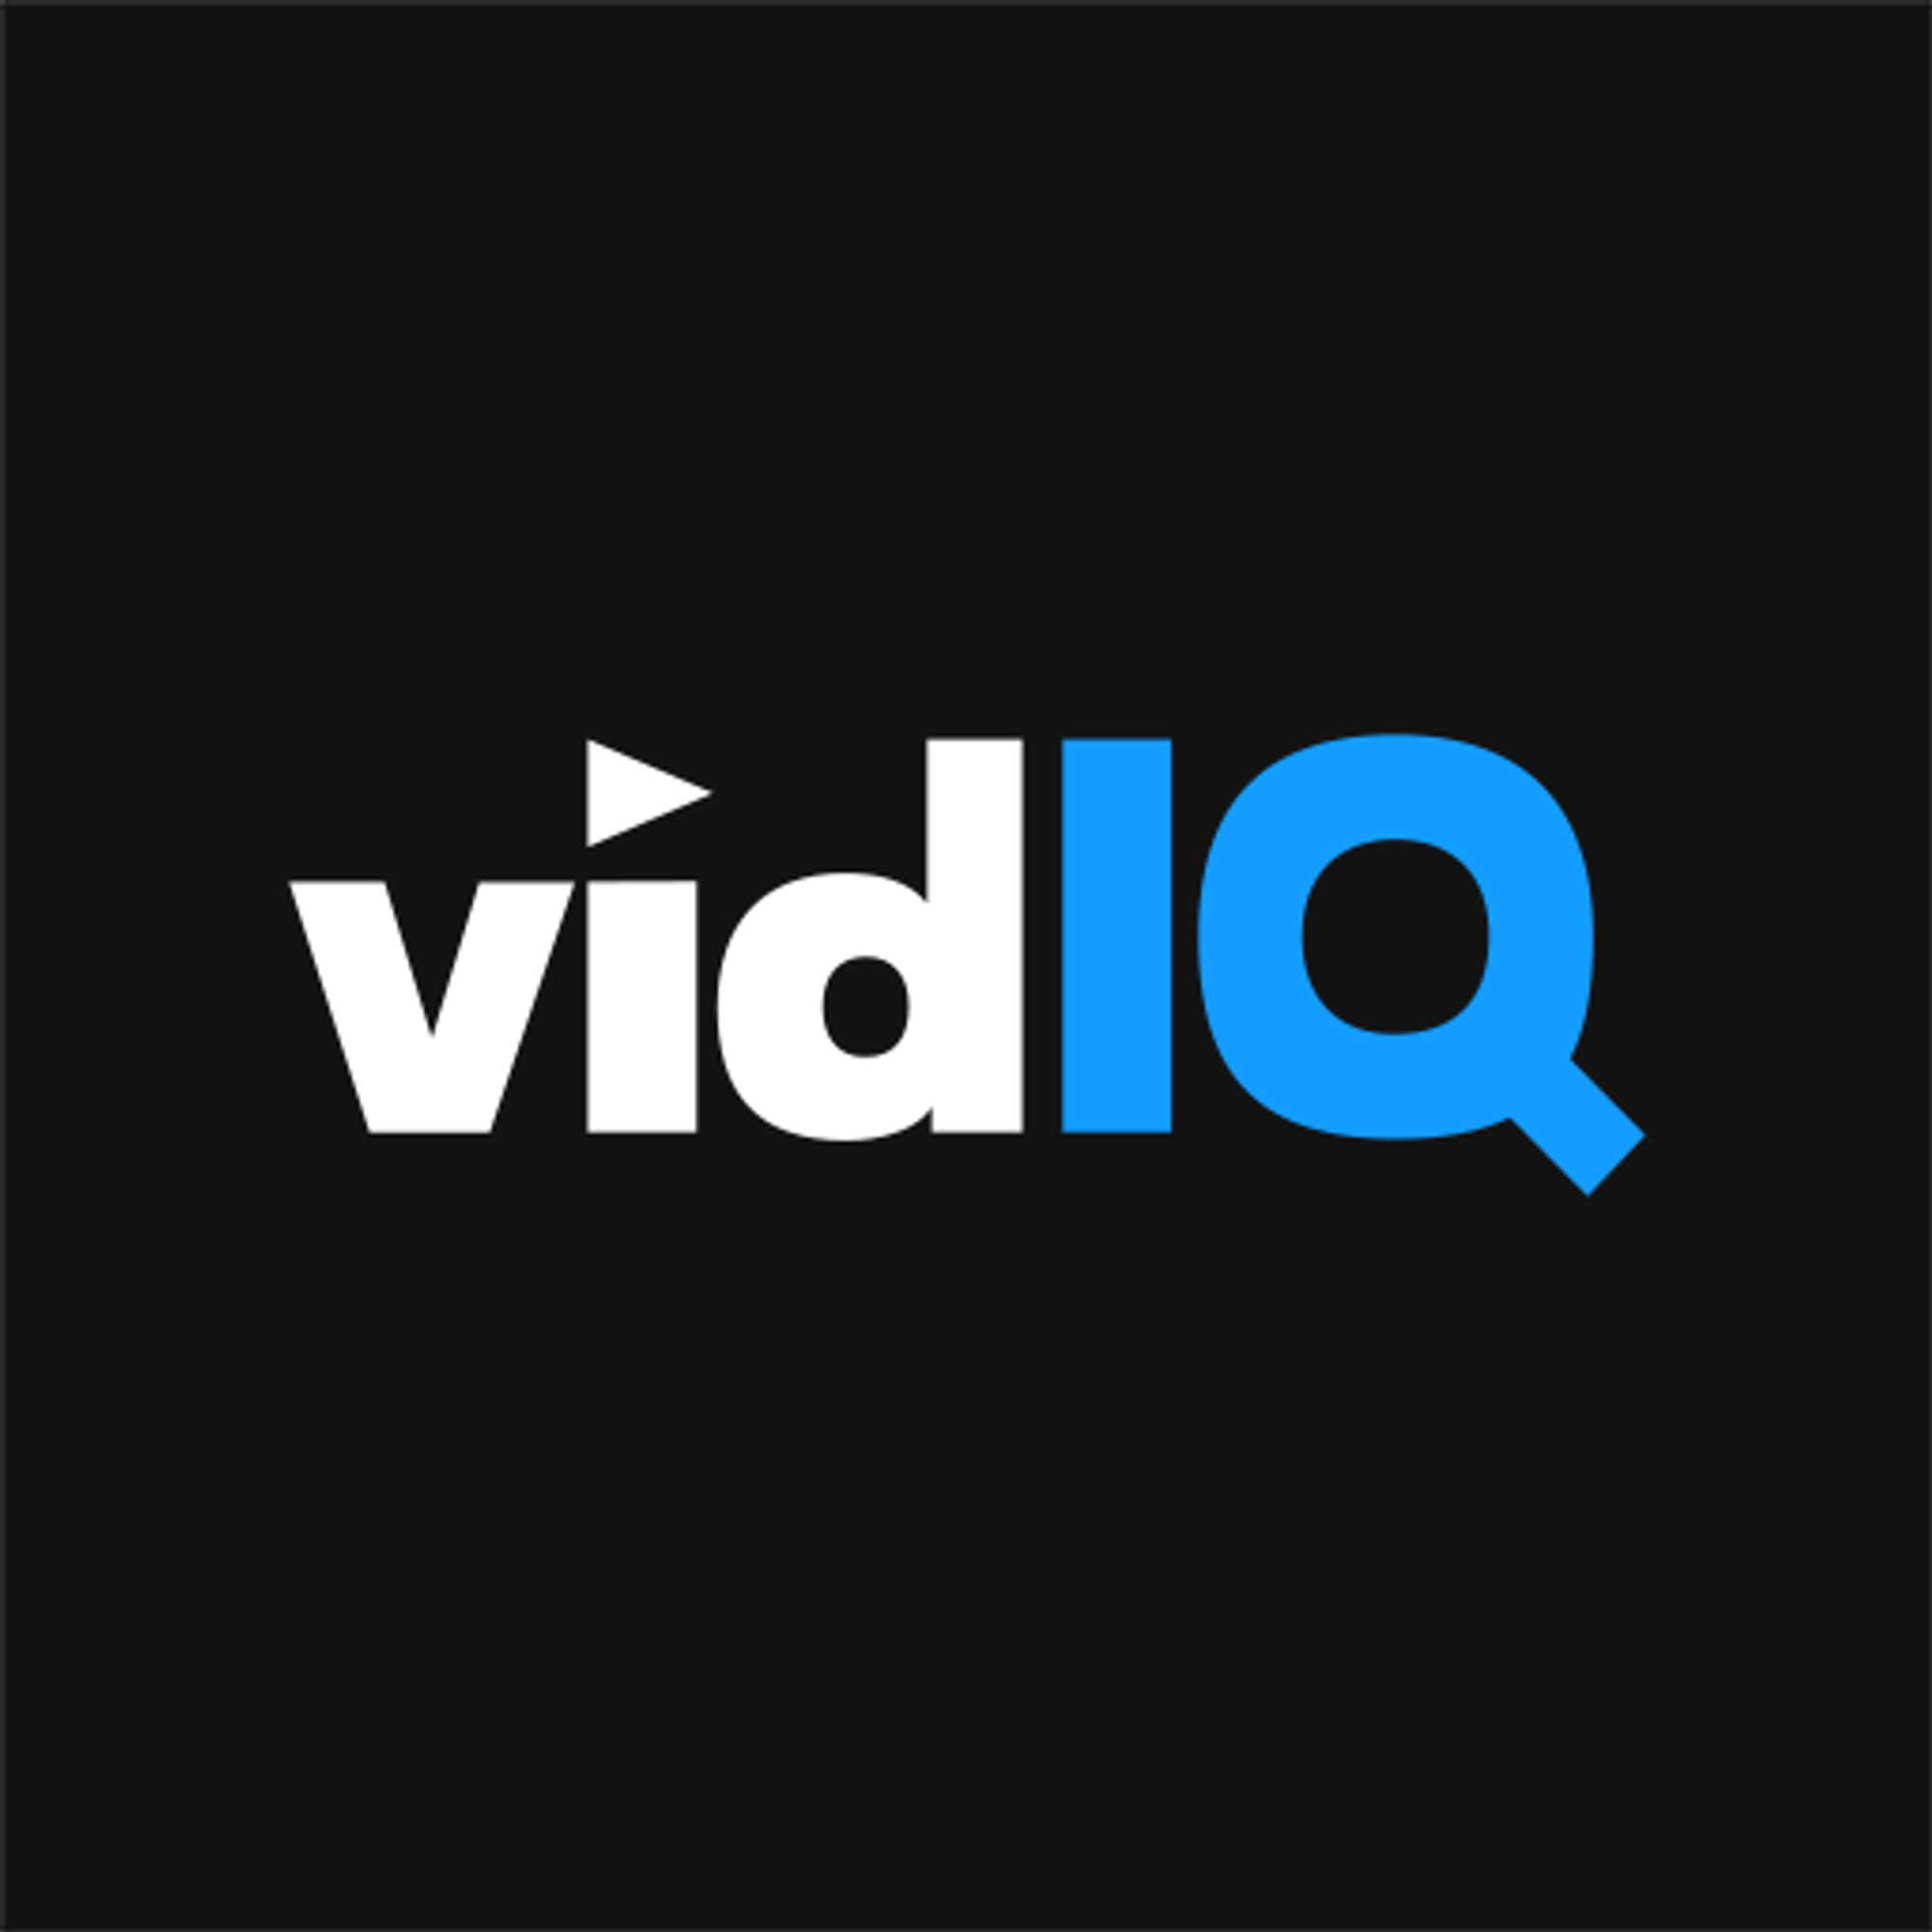 Boost Your Views And Subscribers On YouTube - vidIQ